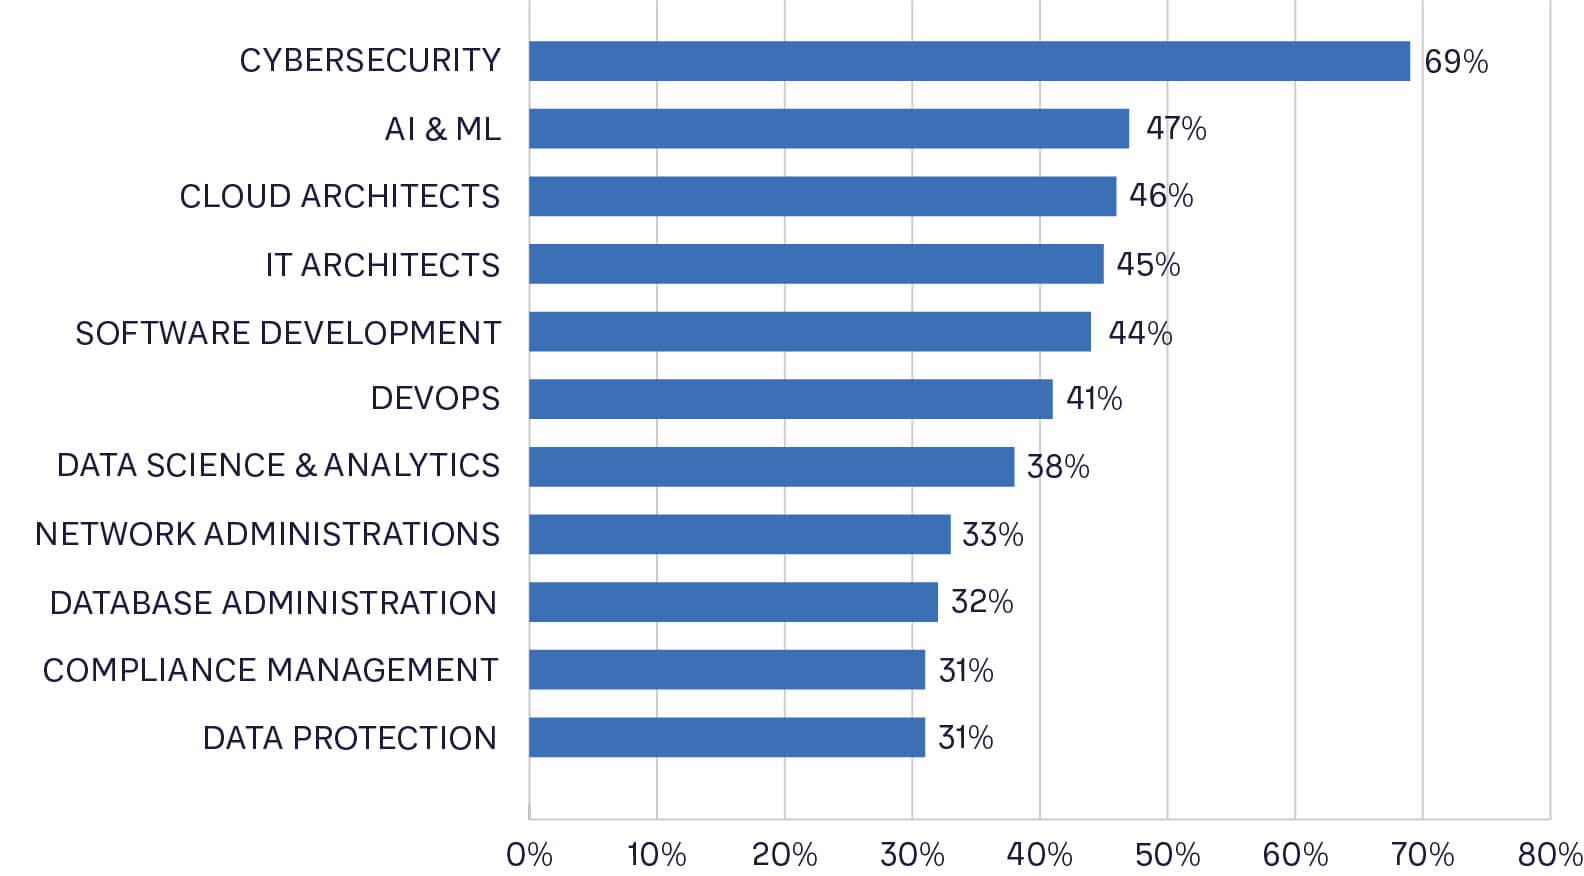 FIGURE 1: COMMON IT SKILLS FACING SHORTAGE (SOURCE: OPEN DATA SURVEY FROM ADL CLIENT RESPONSES)